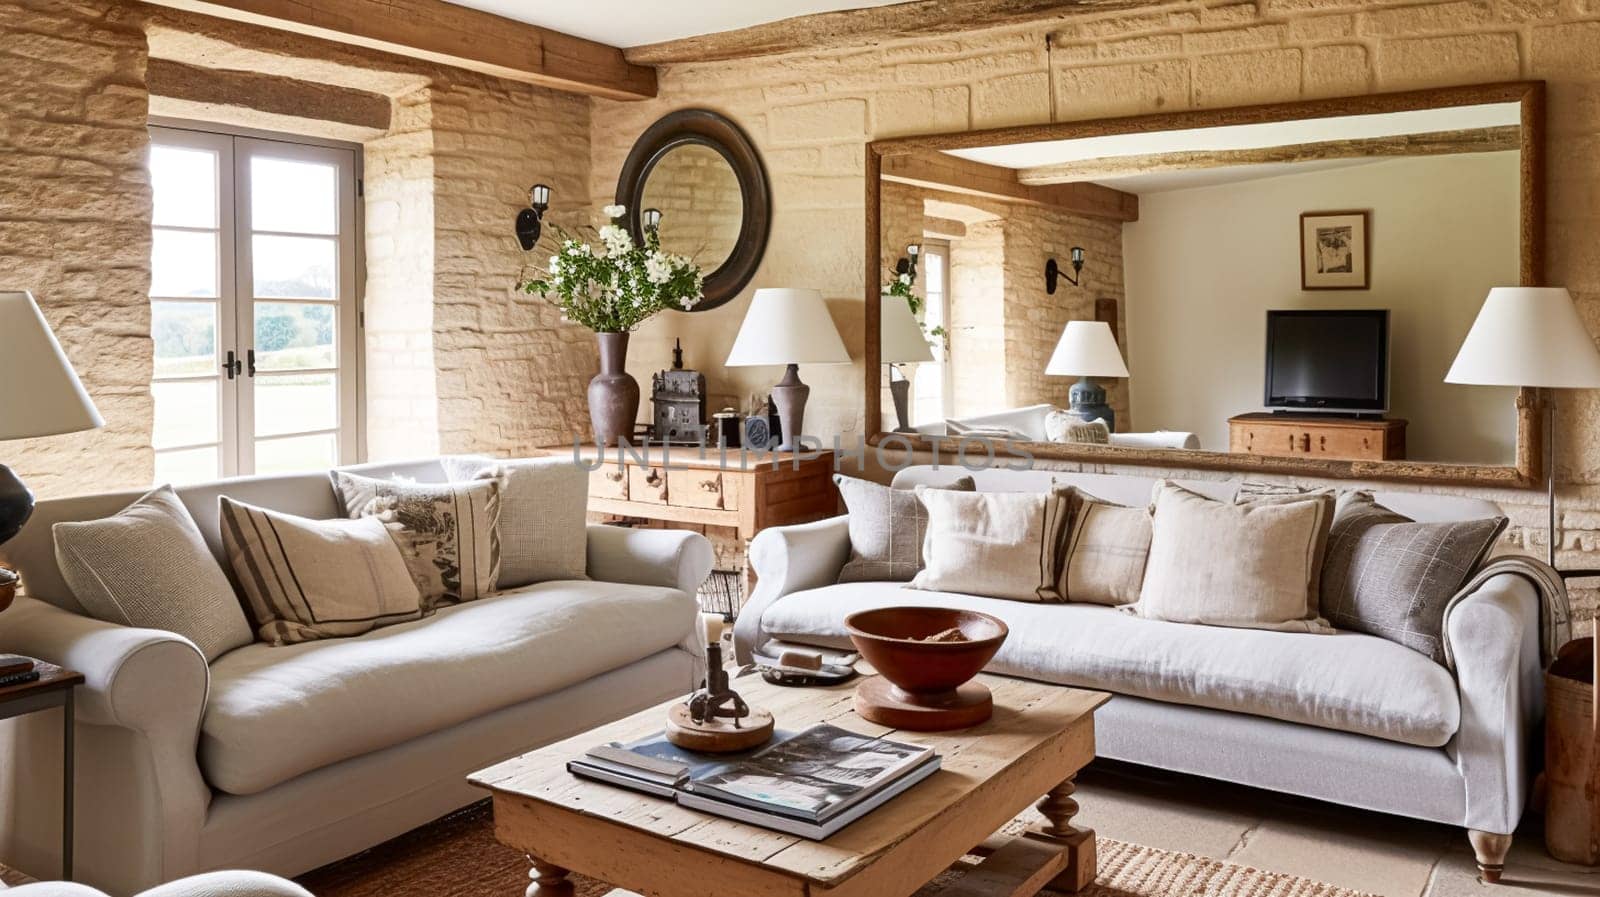 Modern cottage sitting room, living room interior design and country house home decor, sofa and lounge furniture, English Cotswolds countryside style interiors